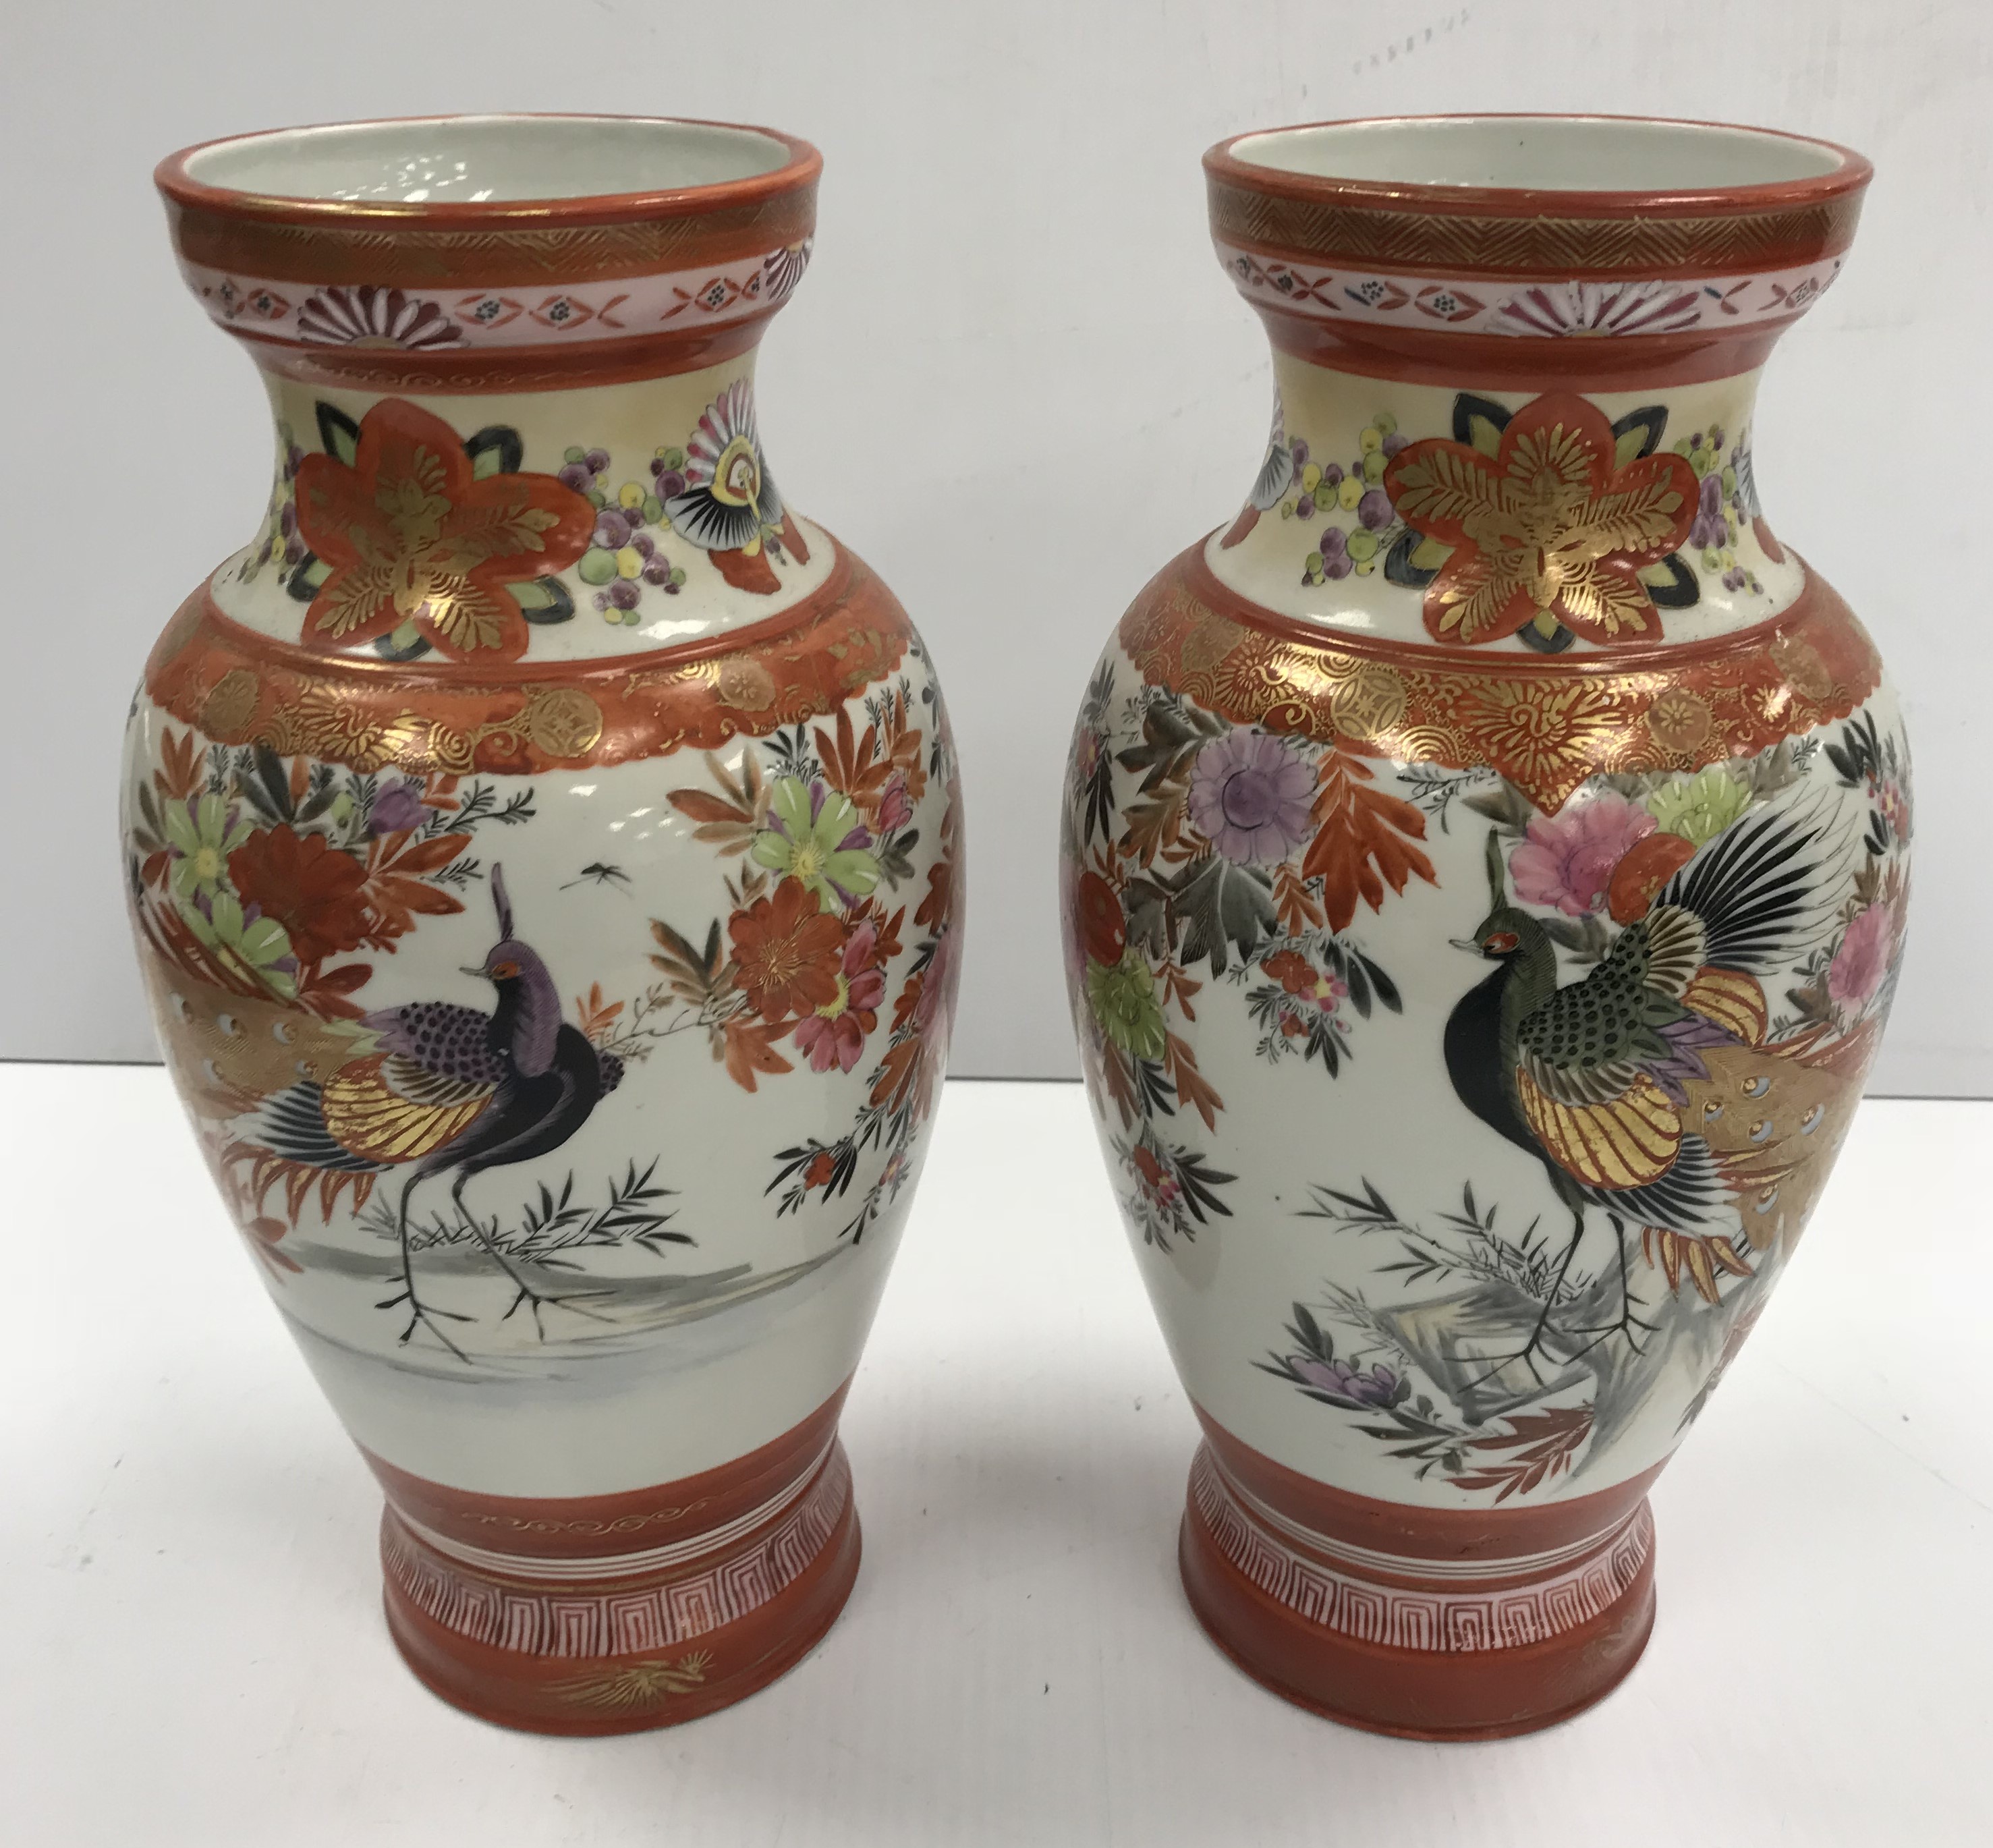 A pair of Japanese Meiji Period Kutani Sei vases decorated with pea fowl amongst flowers and